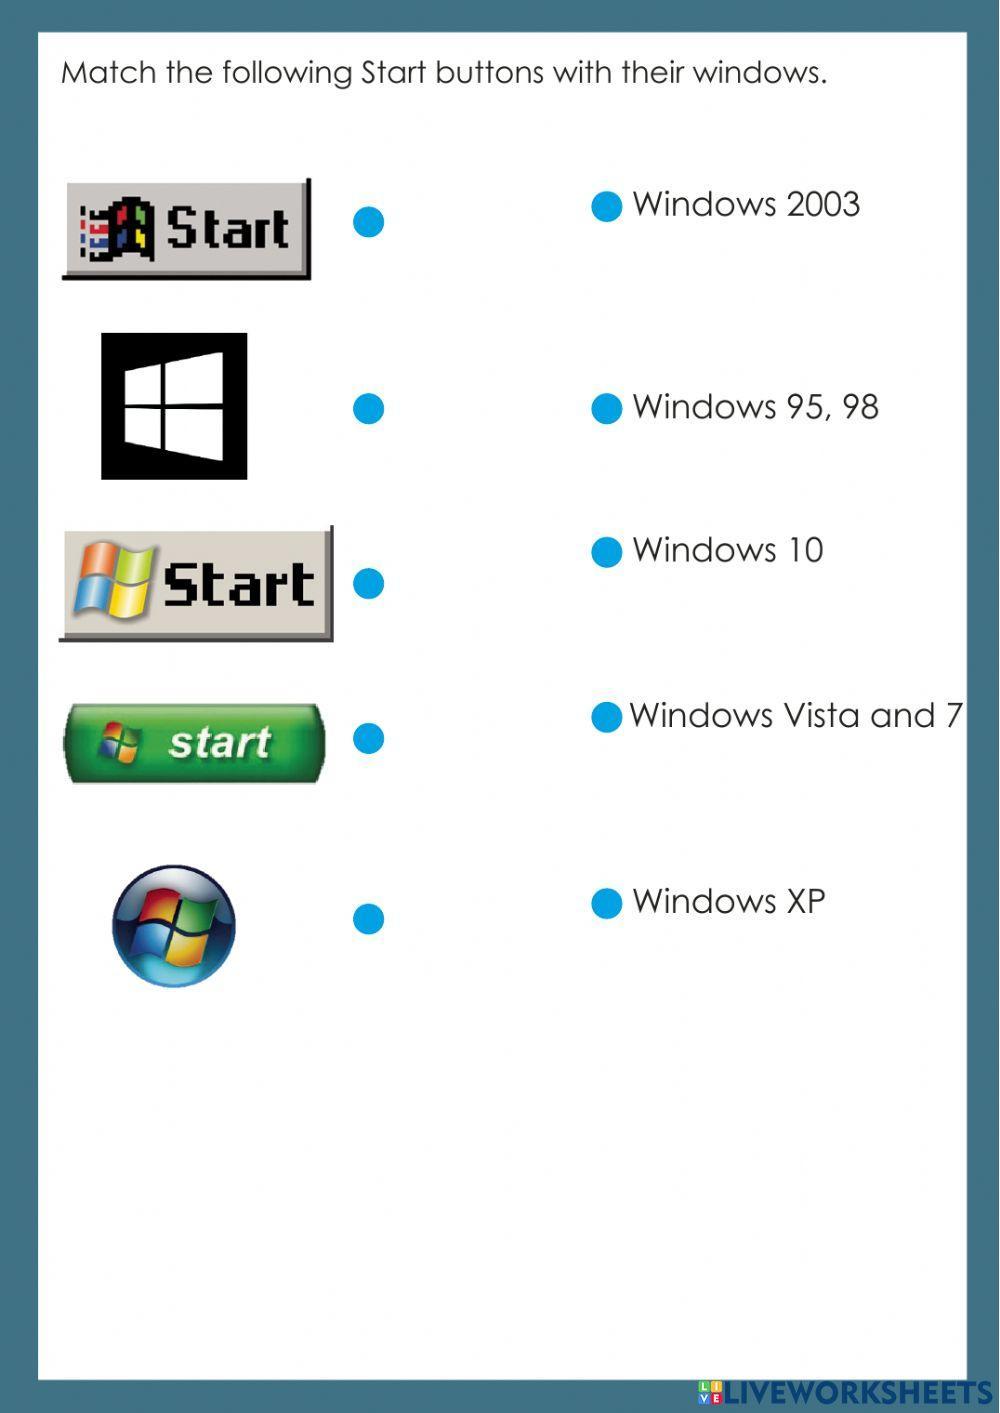 Desktop icons and Windows buttons